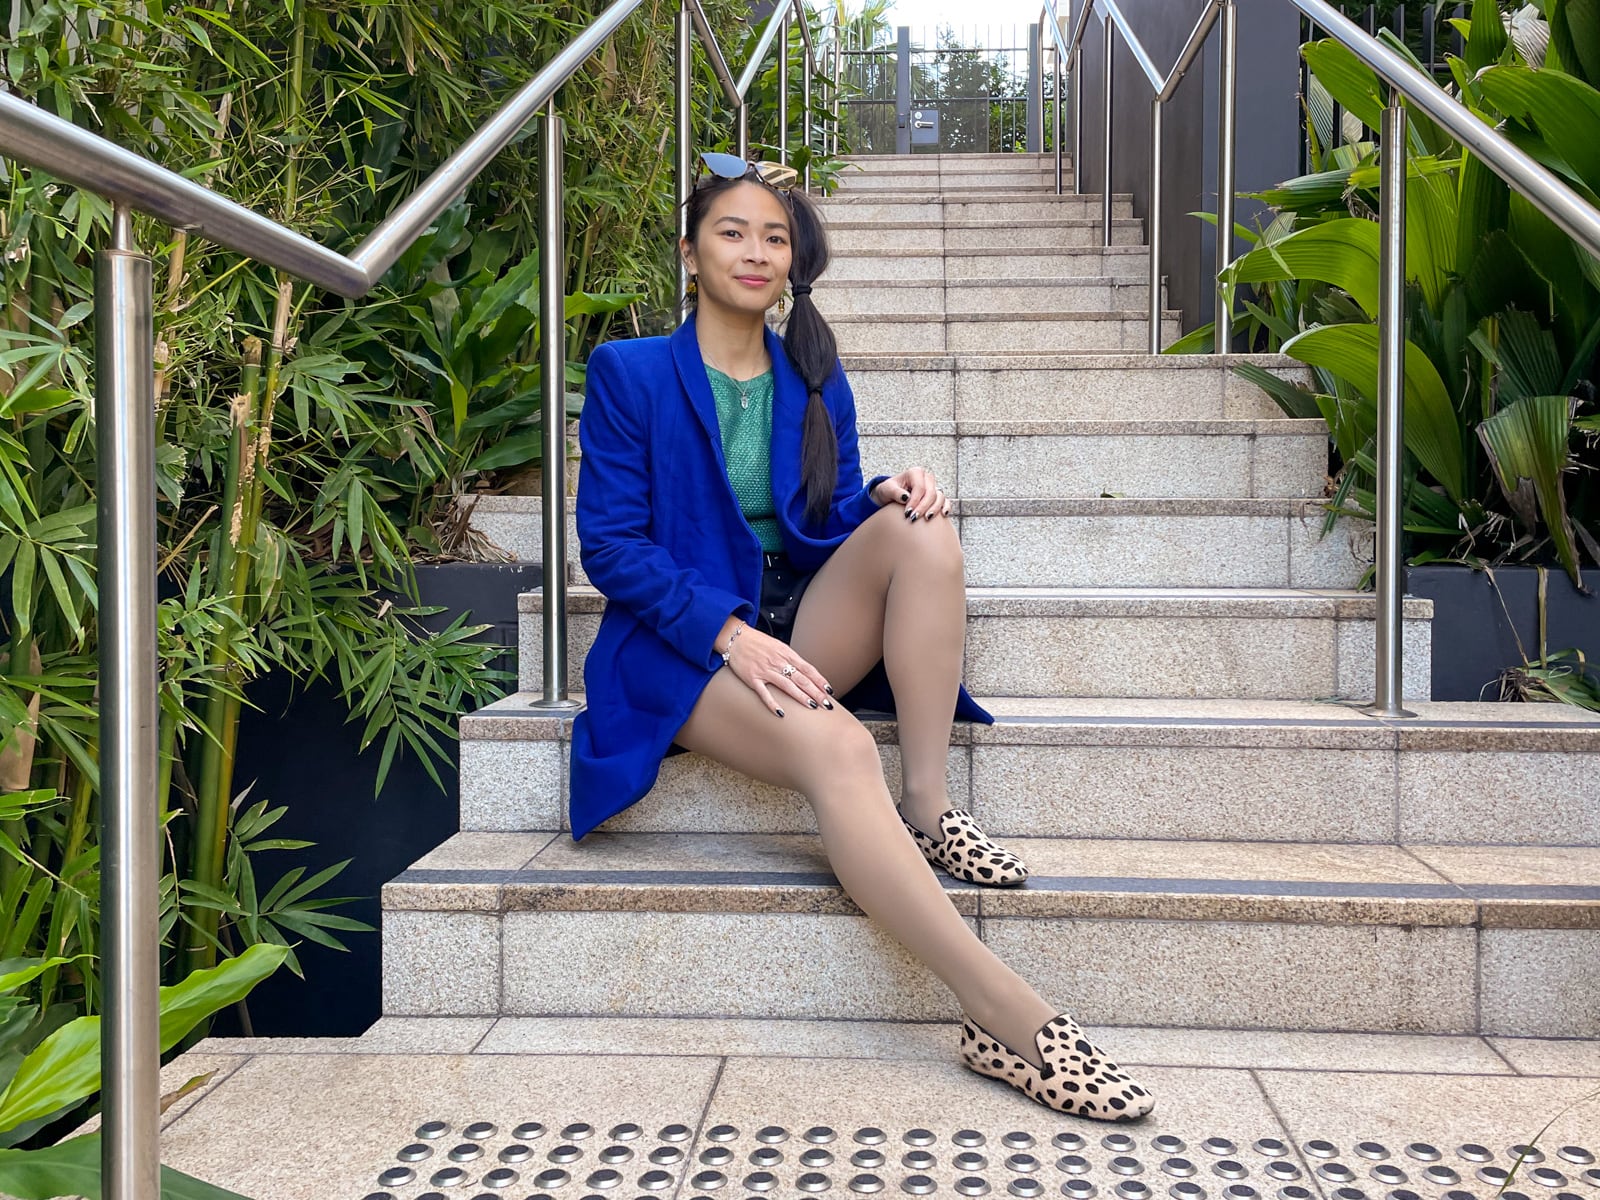 An Asian woman with dark hair tied in a ponytail with tied sections, sitting on a set of concrete stairs. One of her knees is bent and the other leg is outstretched with her hands relaxing on her knees. She is wearing a bright blue coat, a green top and black shorts, and giraffe print loafers. She has sunglasses on top of her head.